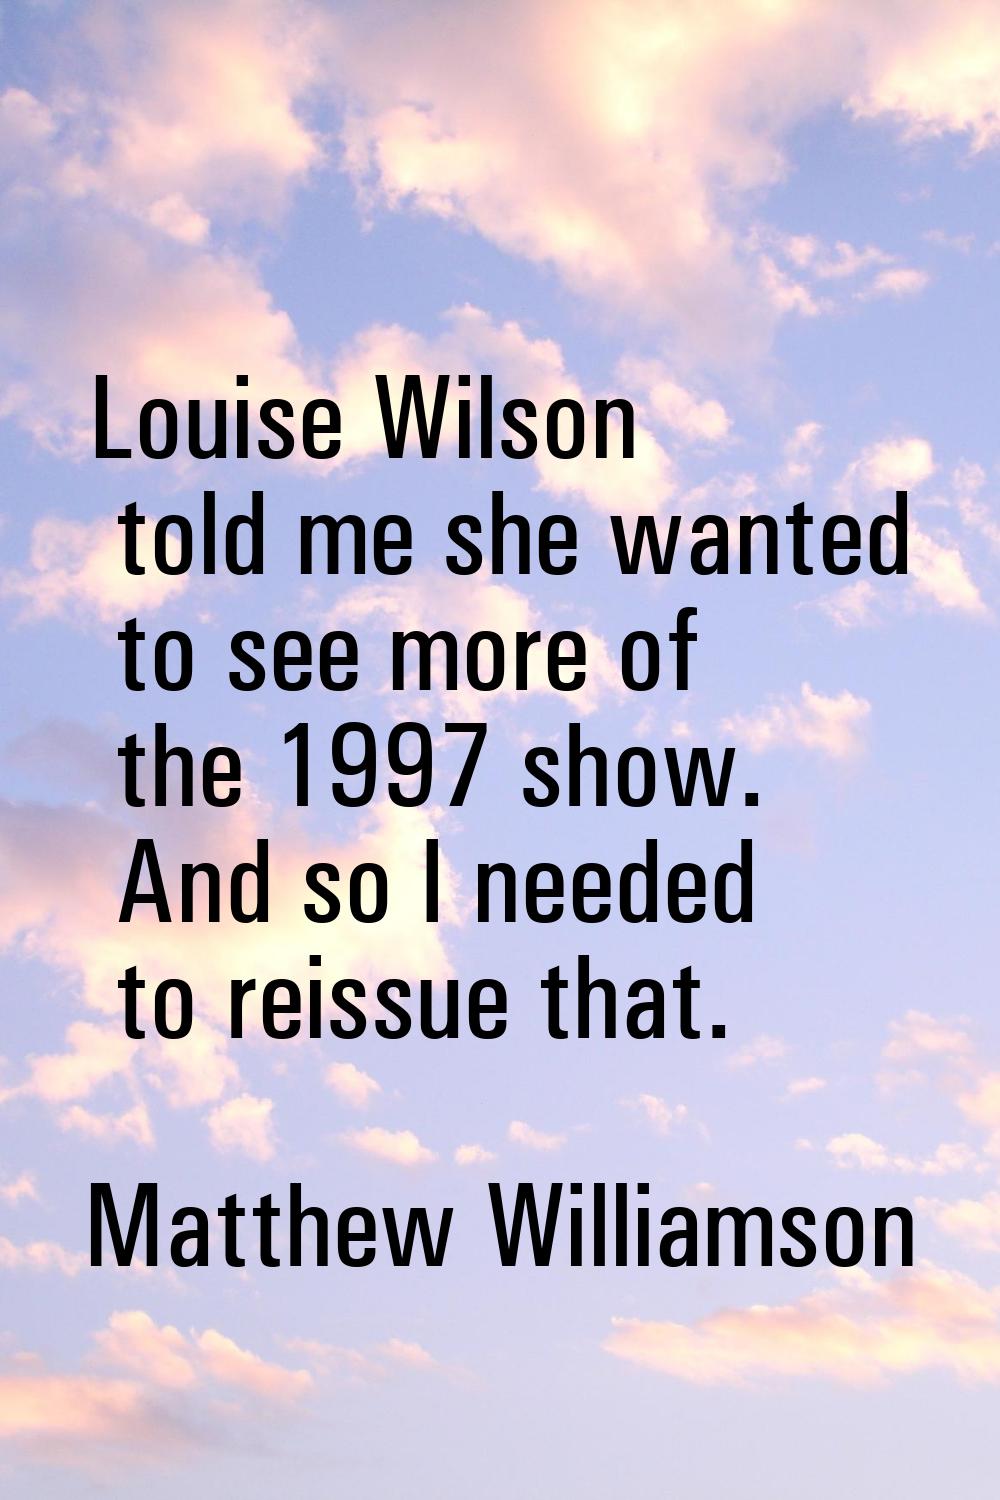 Louise Wilson told me she wanted to see more of the 1997 show. And so I needed to reissue that.